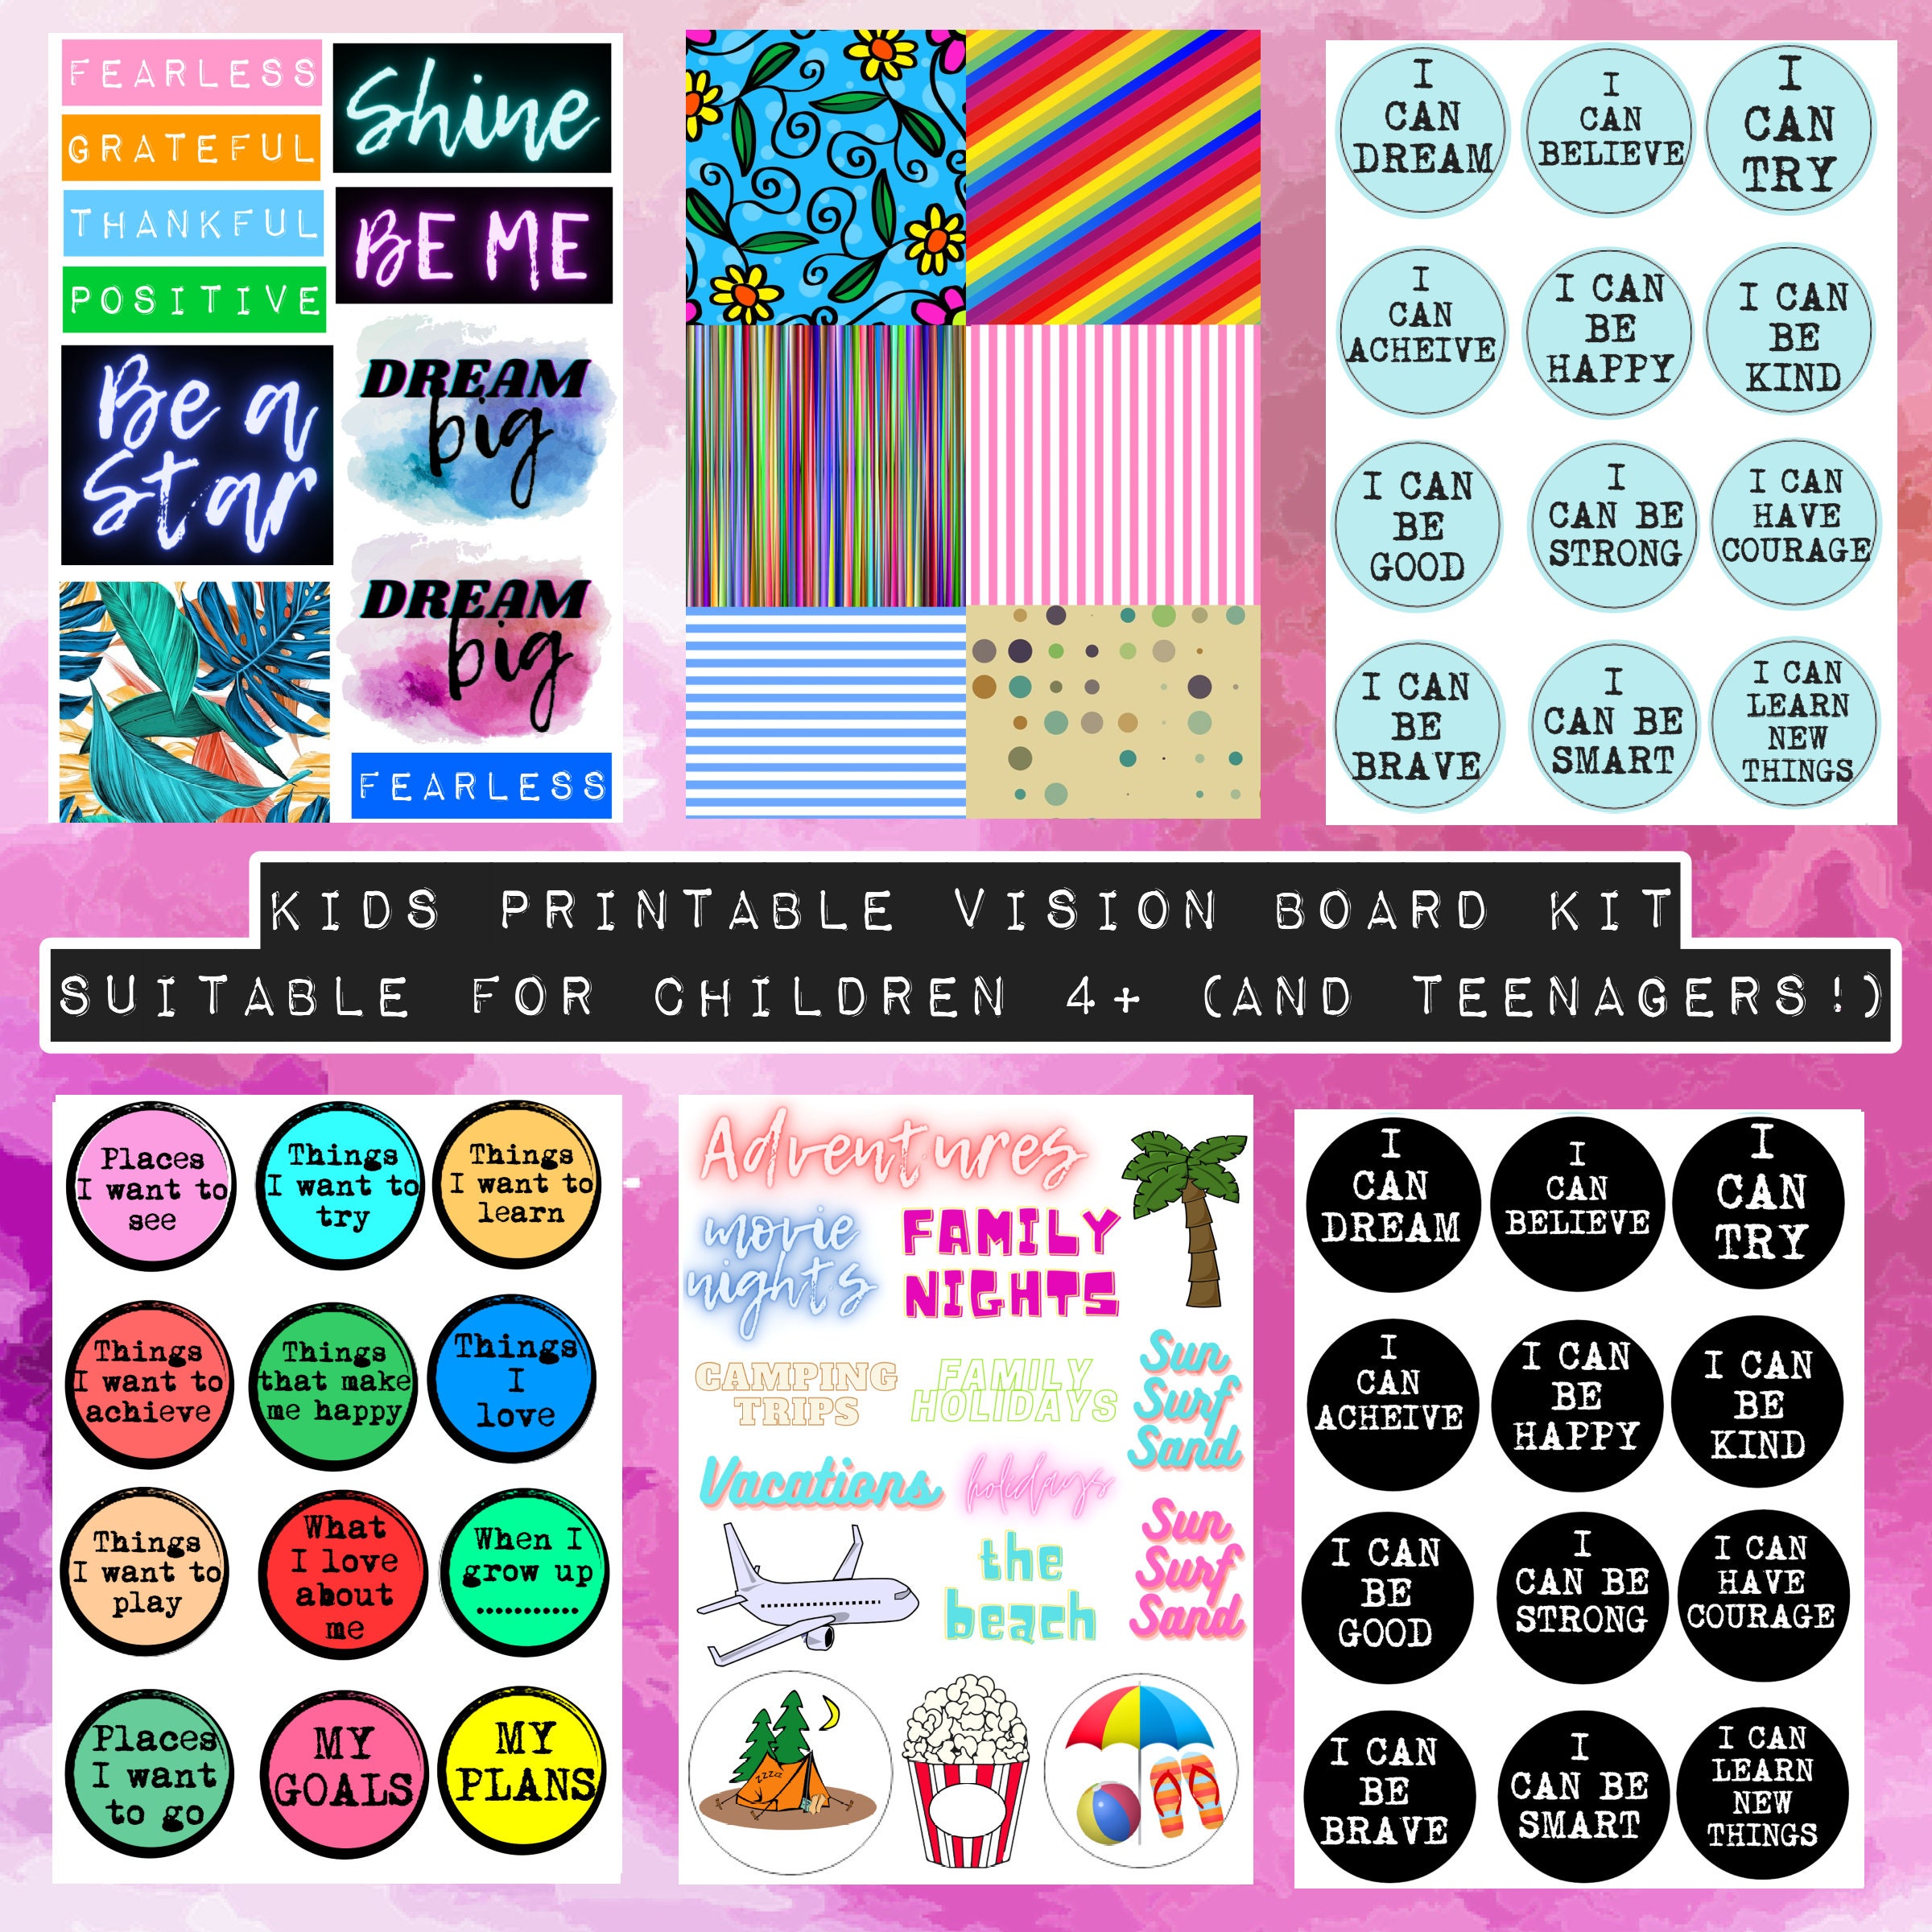 Vision Board Clip Art: Deluxe Collection of Over 500 Colorful Pictures,  Quotes and Affirmation Cards to Cut and Pin onto Your Vision Board